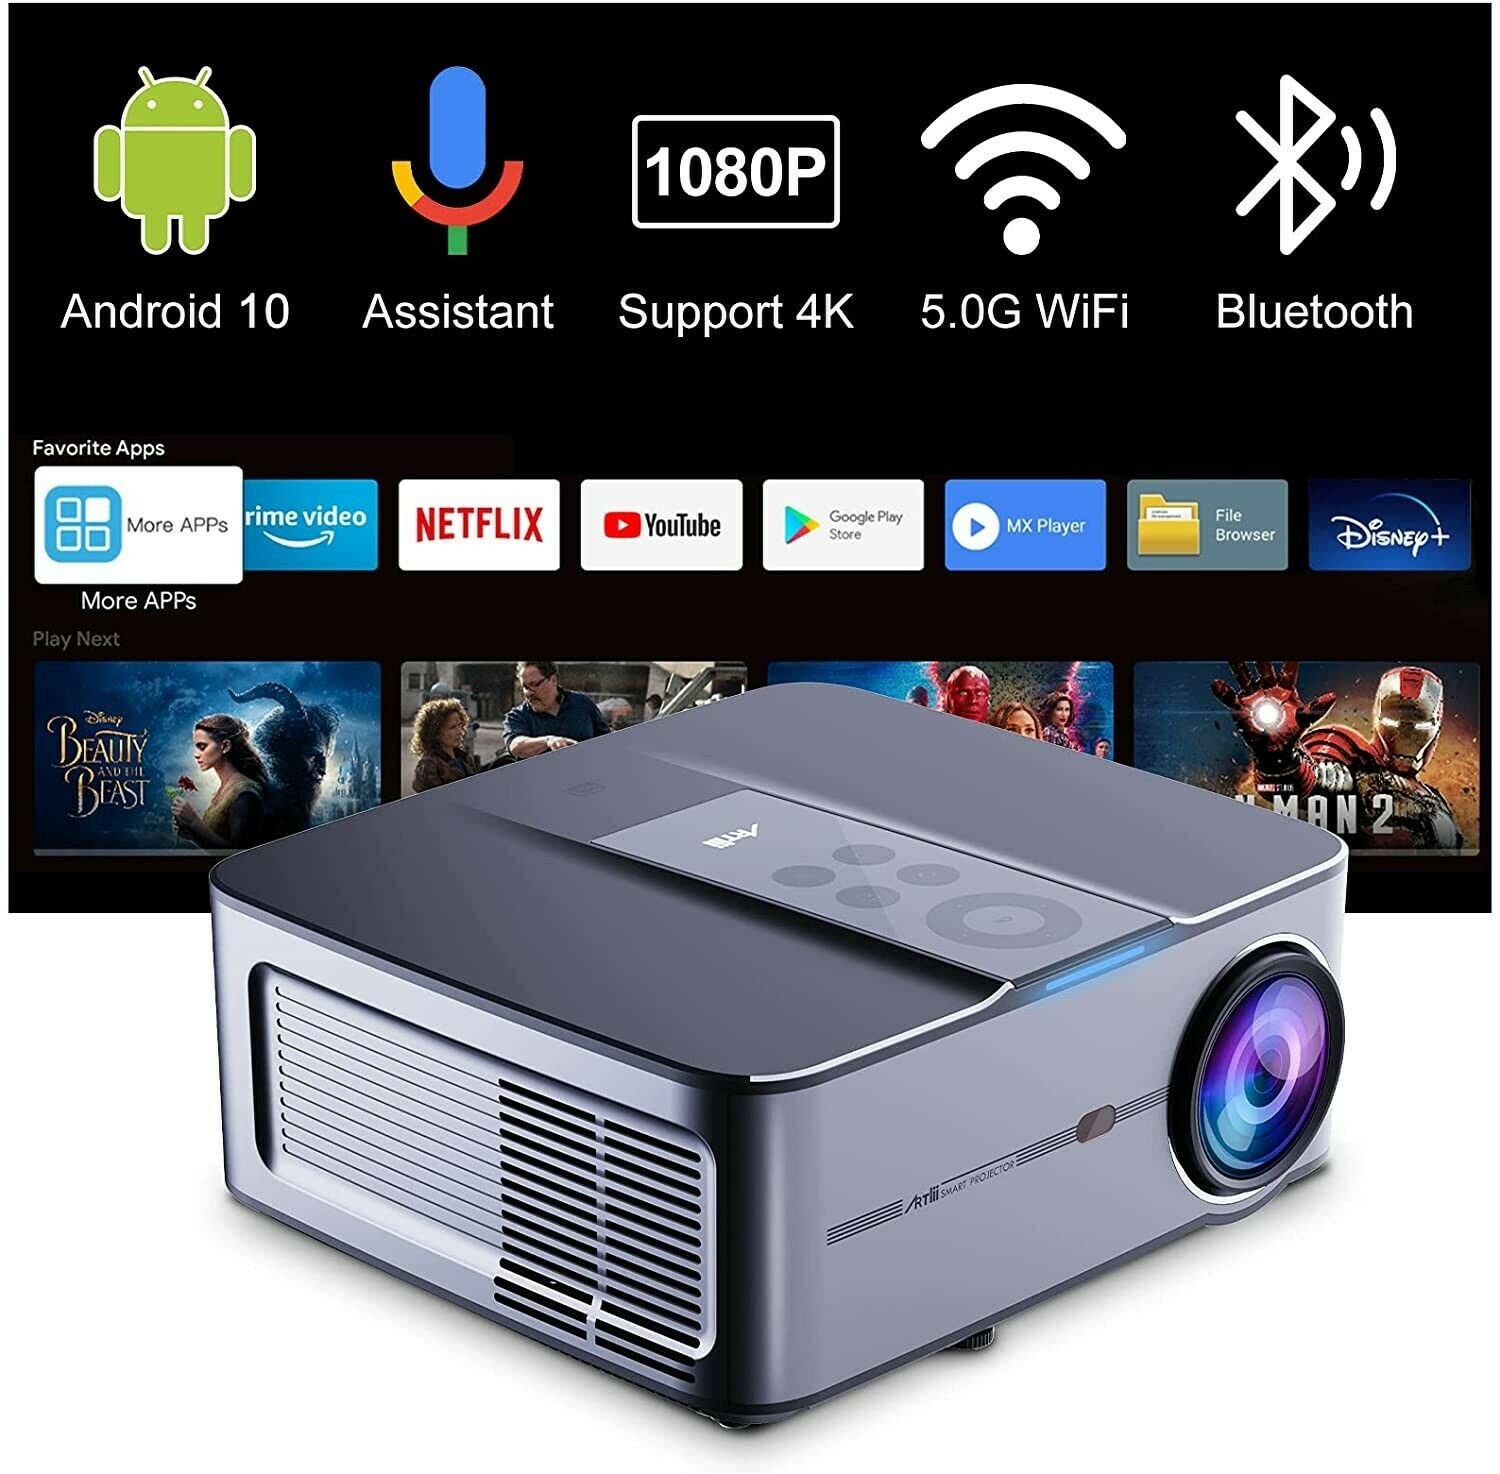 Smart Projector 5G WiFi Bluetooth Artlii Play3 4K Supported Full HD Native 1080P